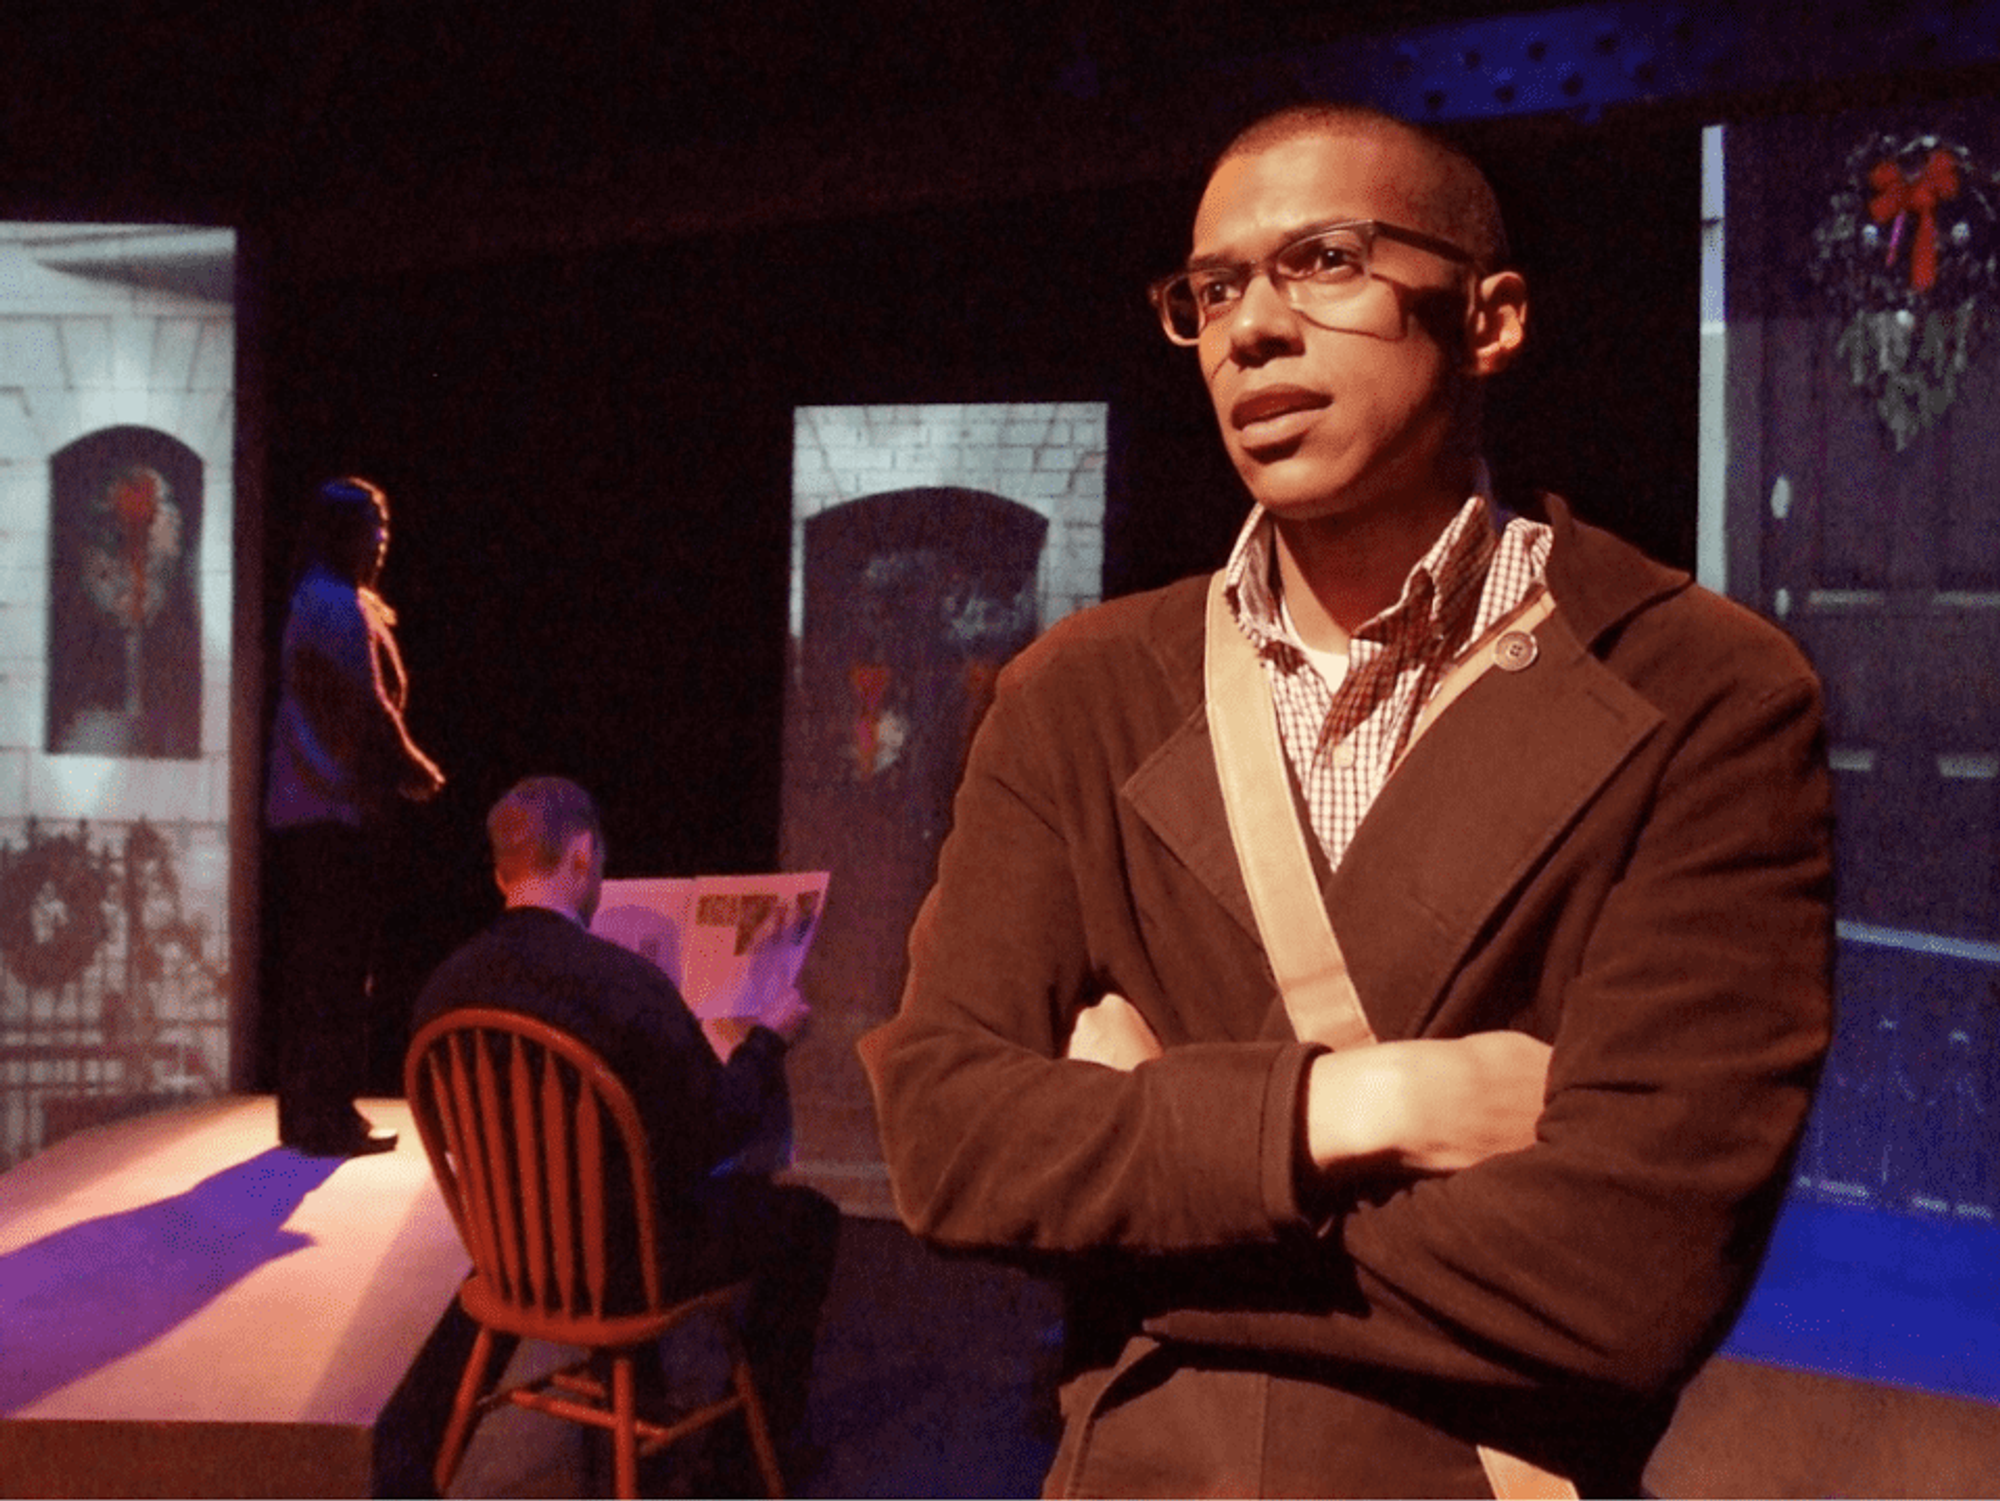 Skylight Theatre's world premiere of Obama-ology